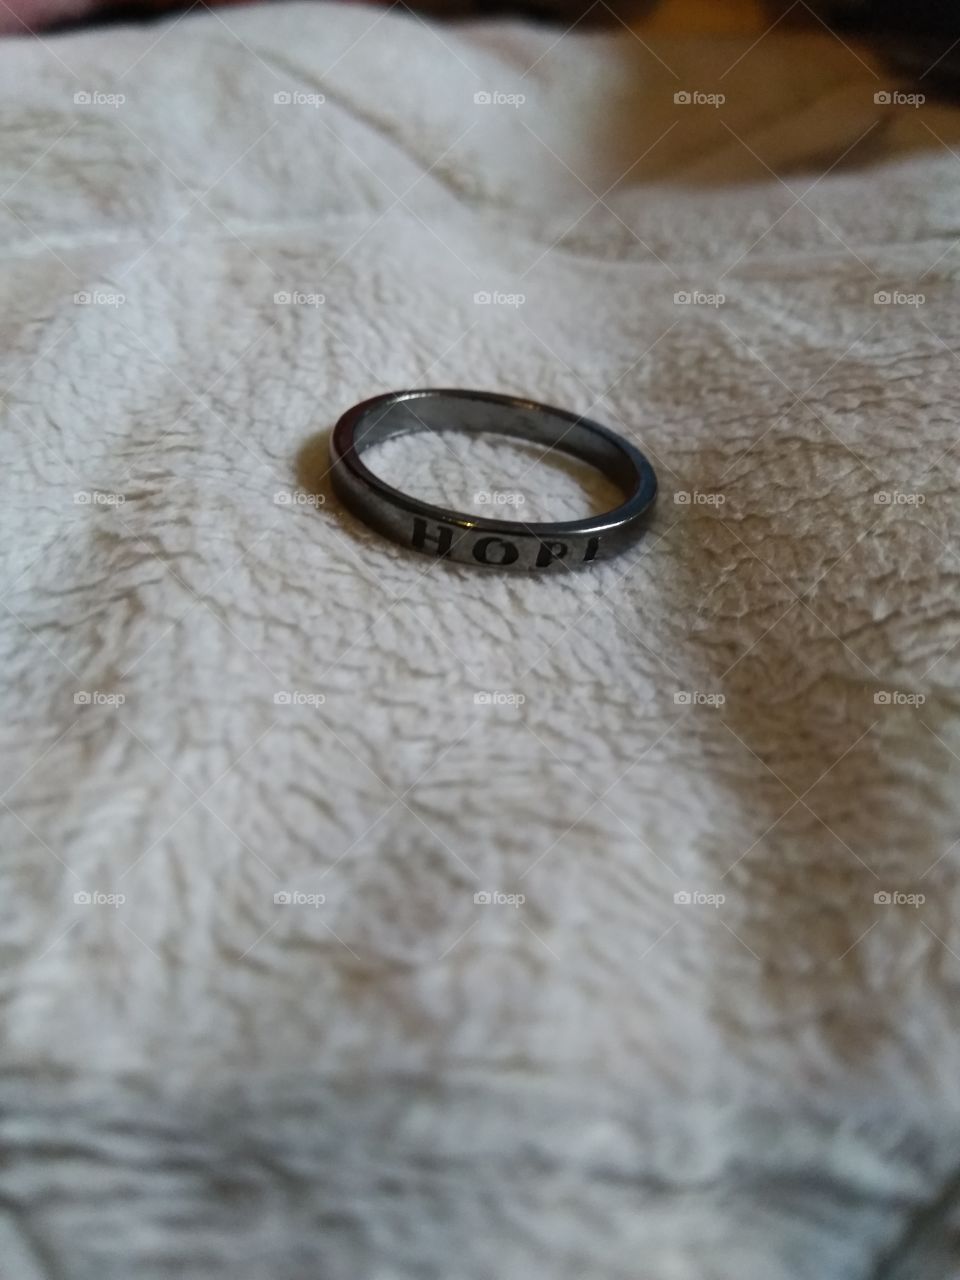 A ring saying hope: something that I really needed and offered comfort in a moment of need. Simple and not even a great picture, but a good message